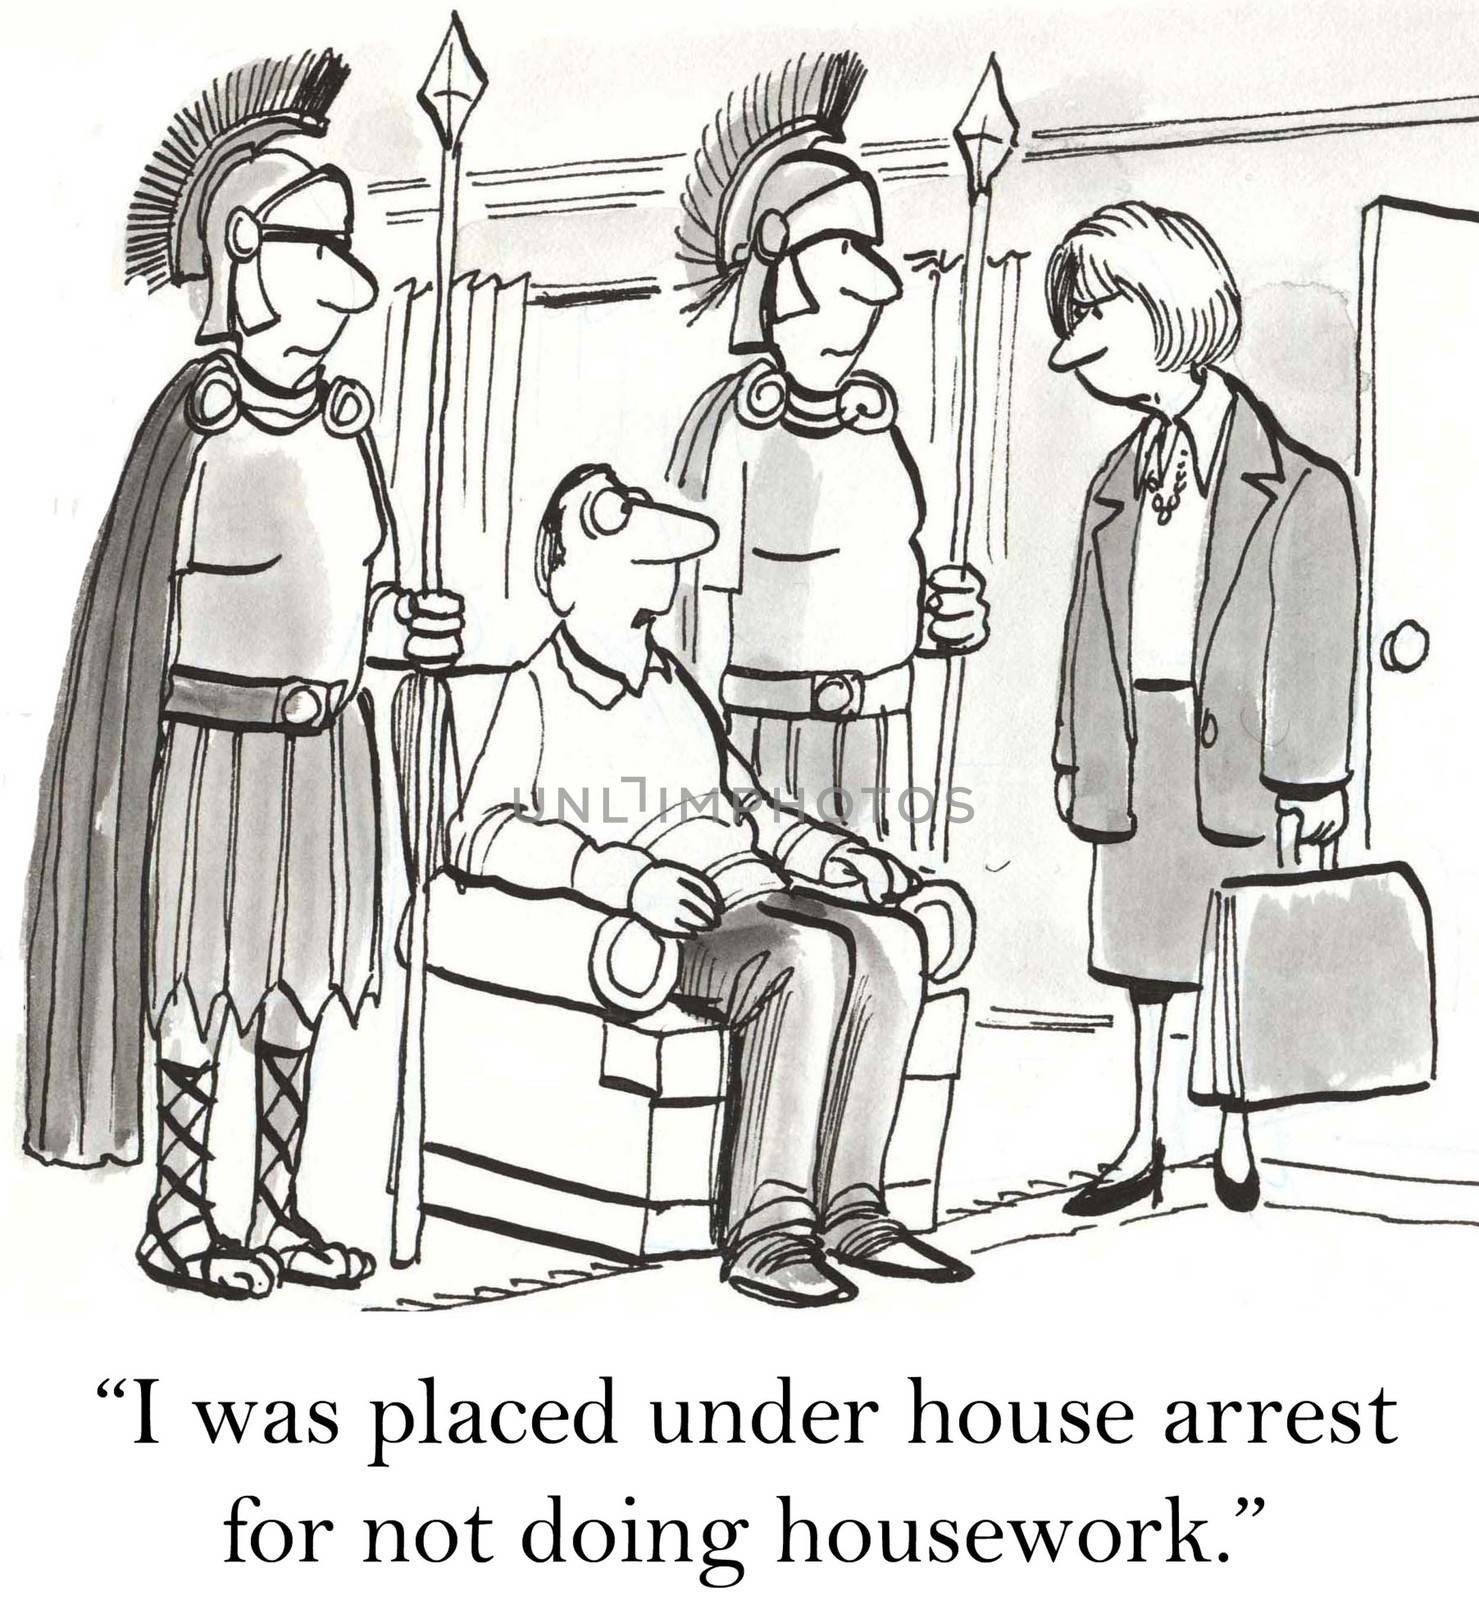 "I was placed under house arrest for not doing housework."